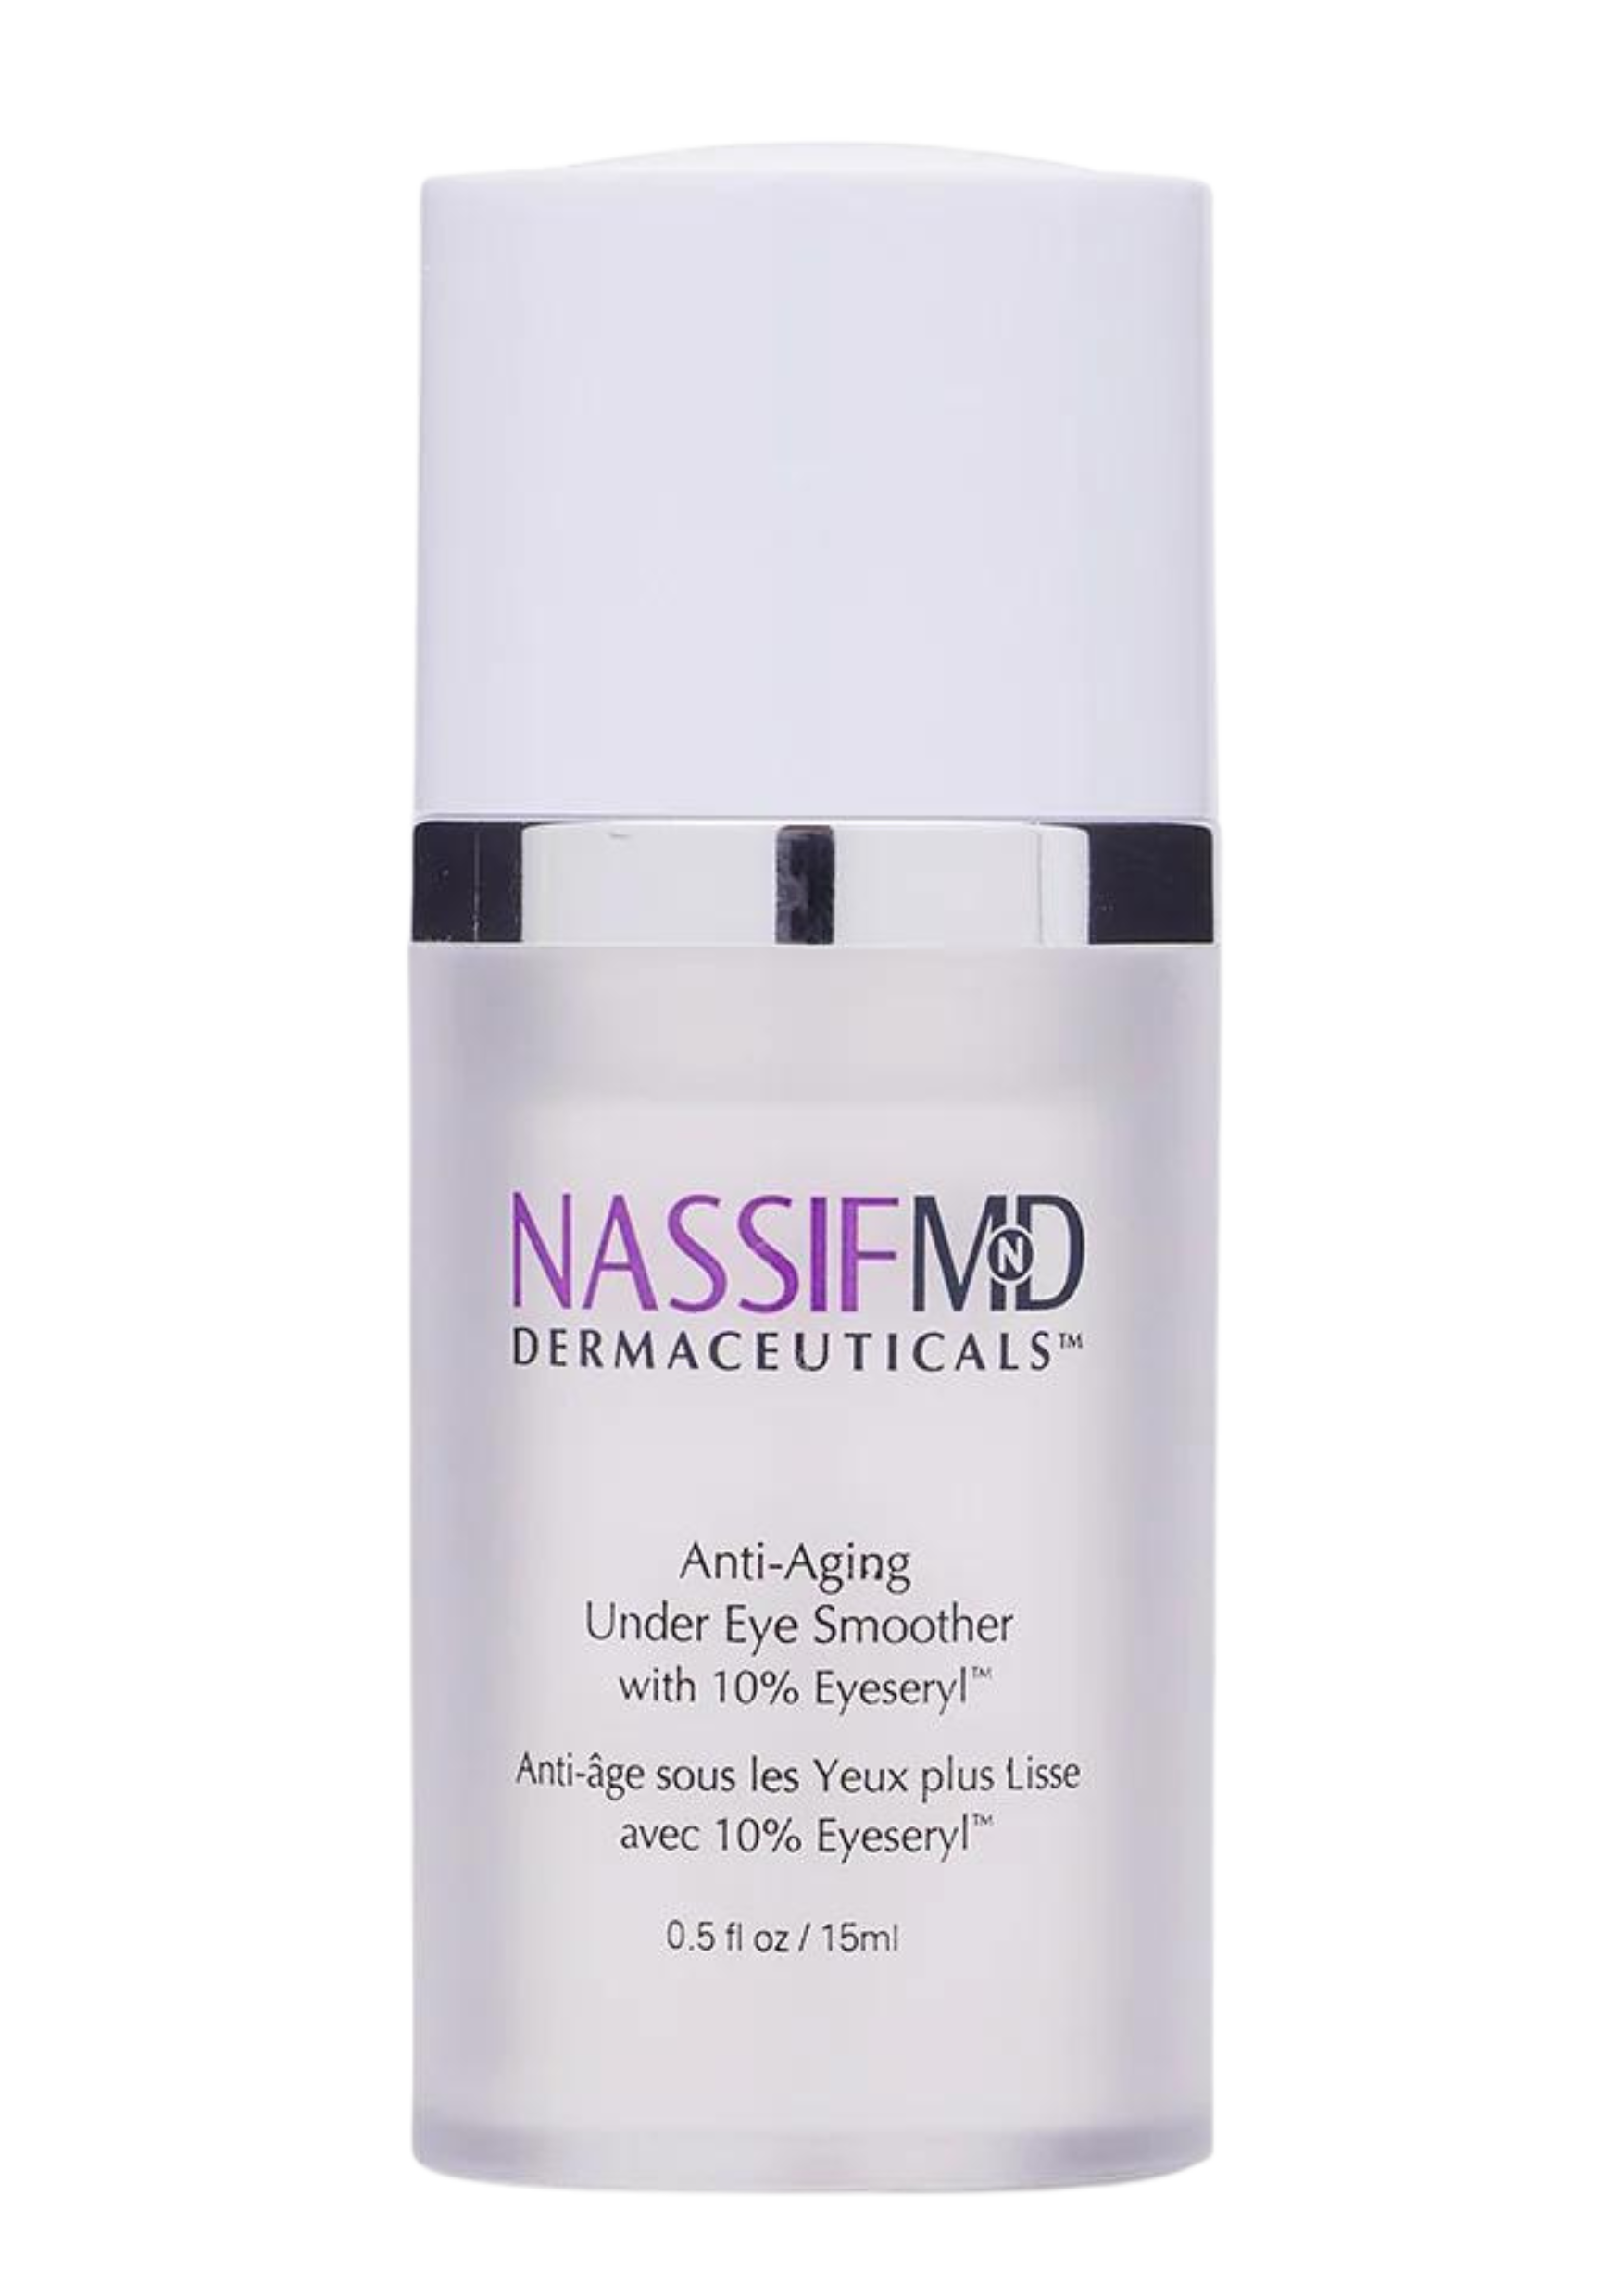 Nassif MD® Under Eye Smoother